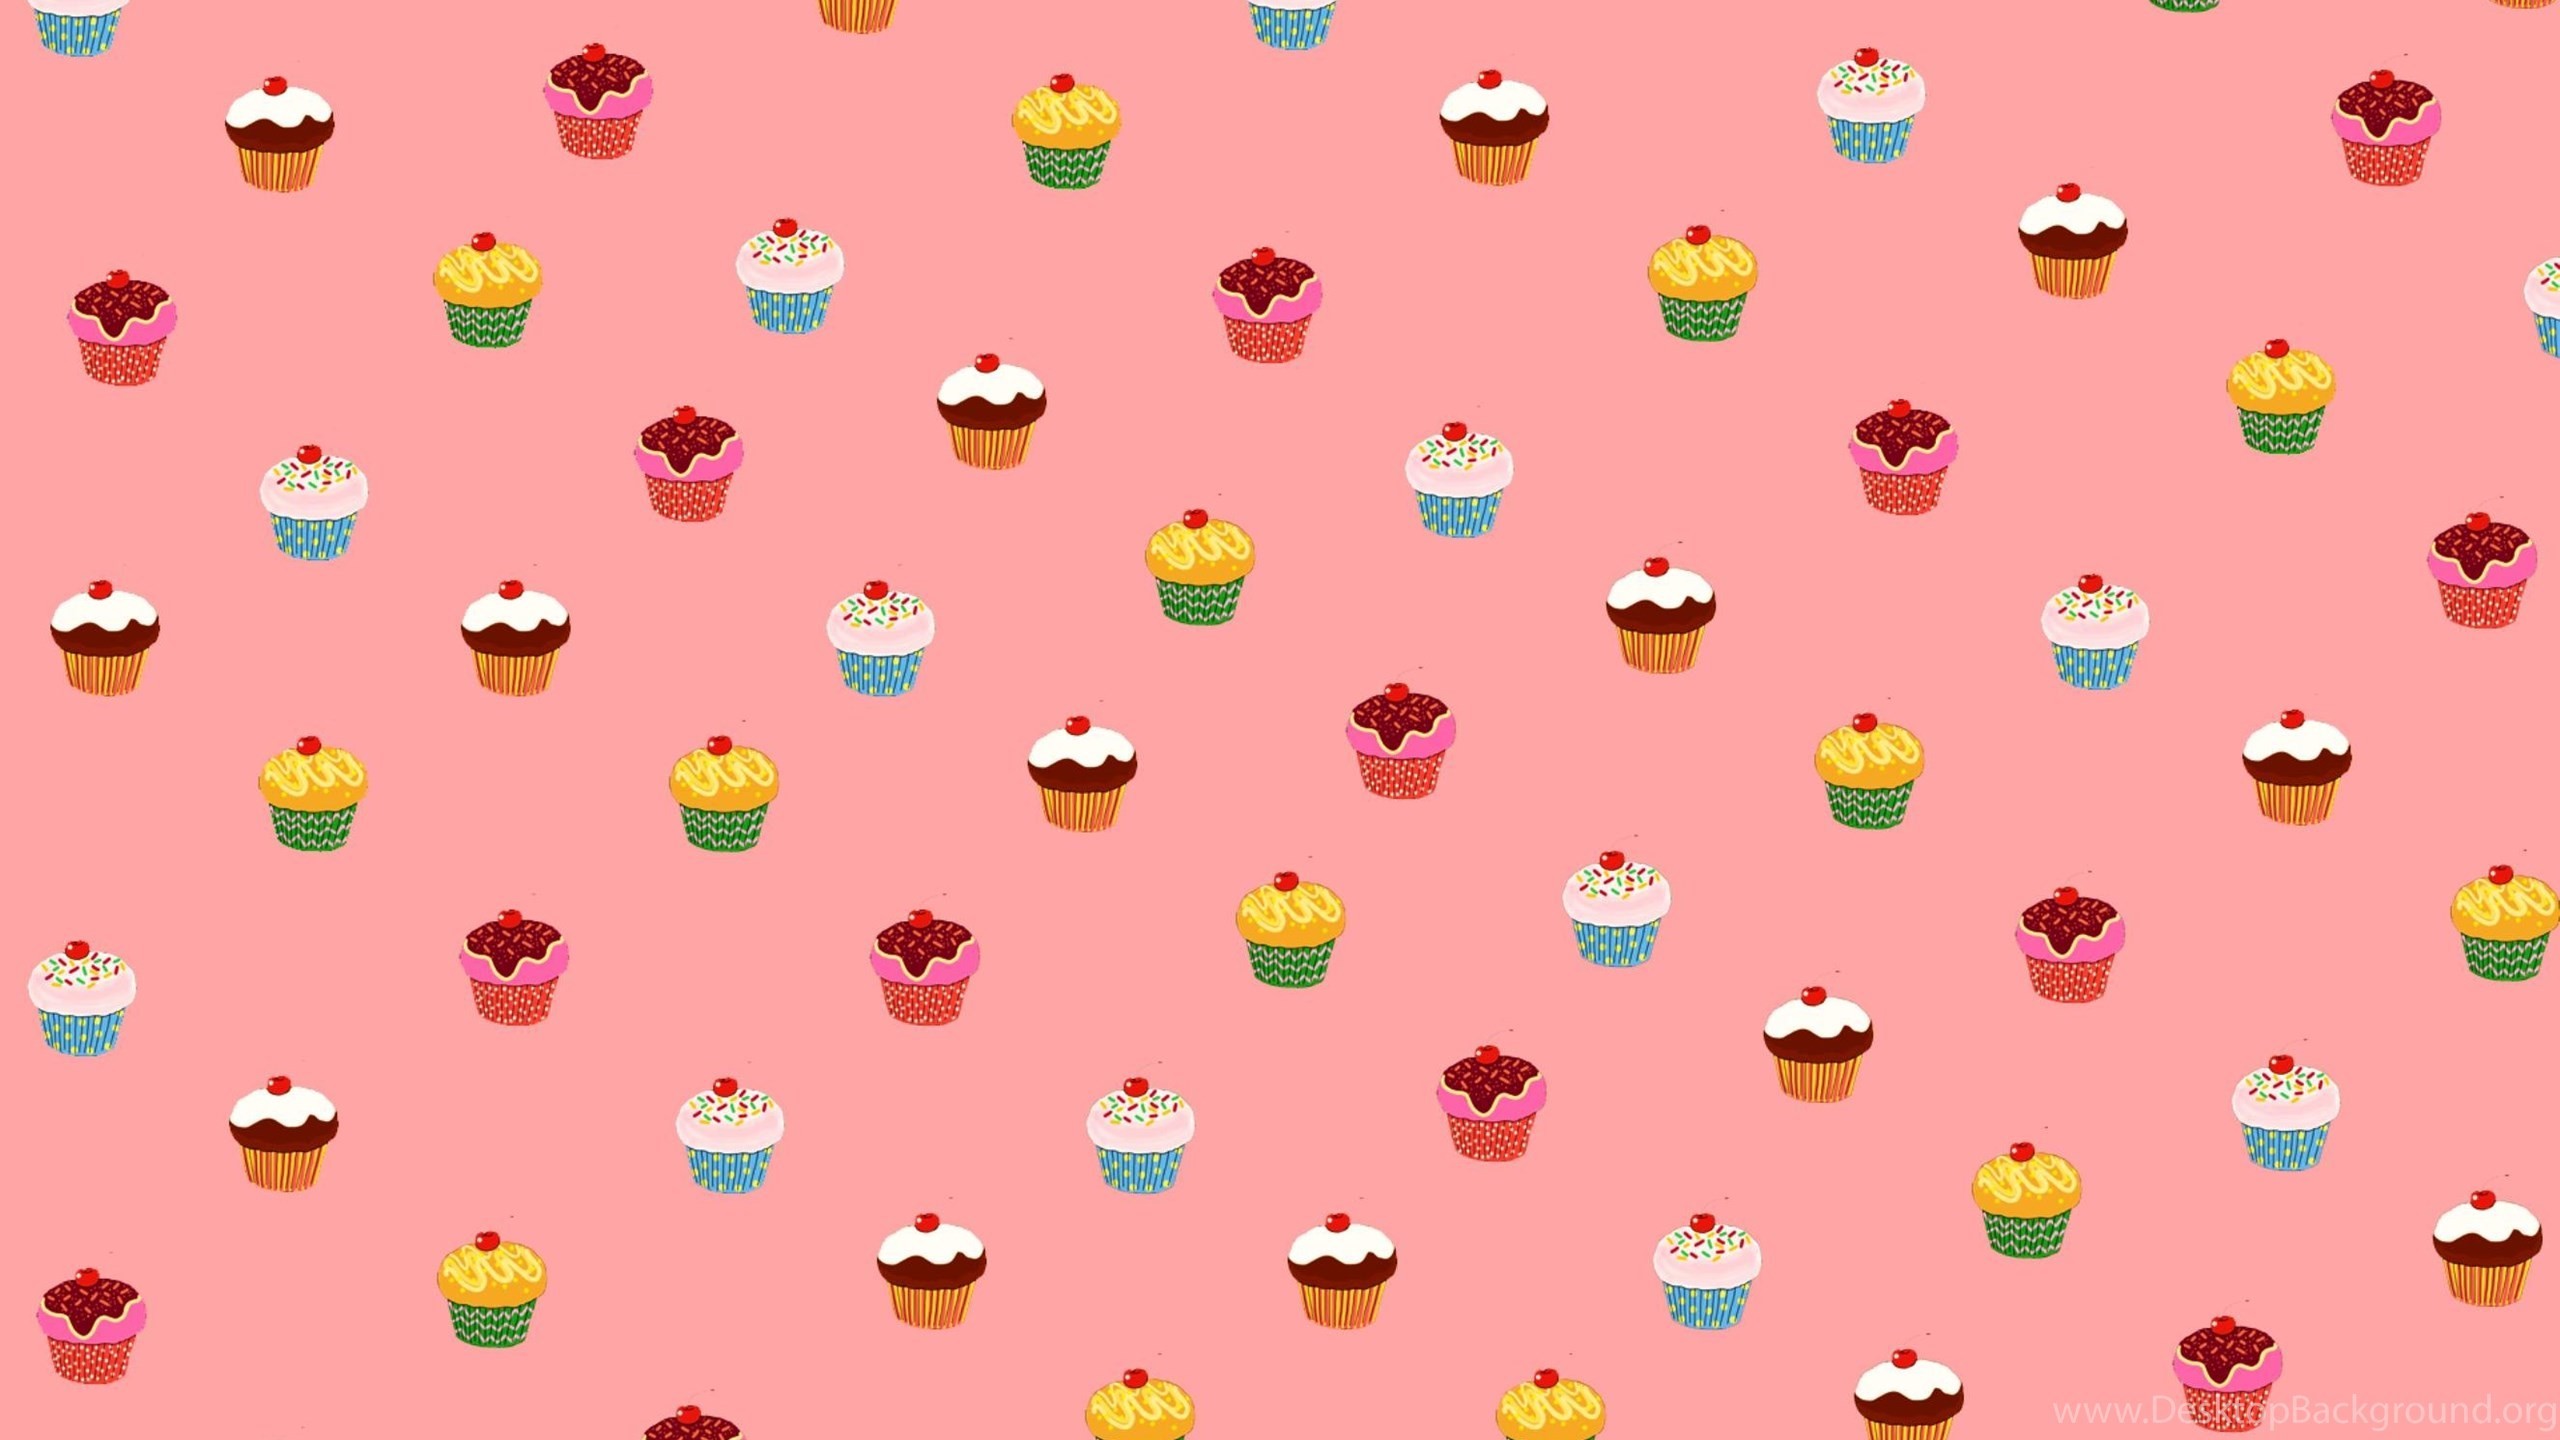 Cute Bff Wallpaper (71+ images)